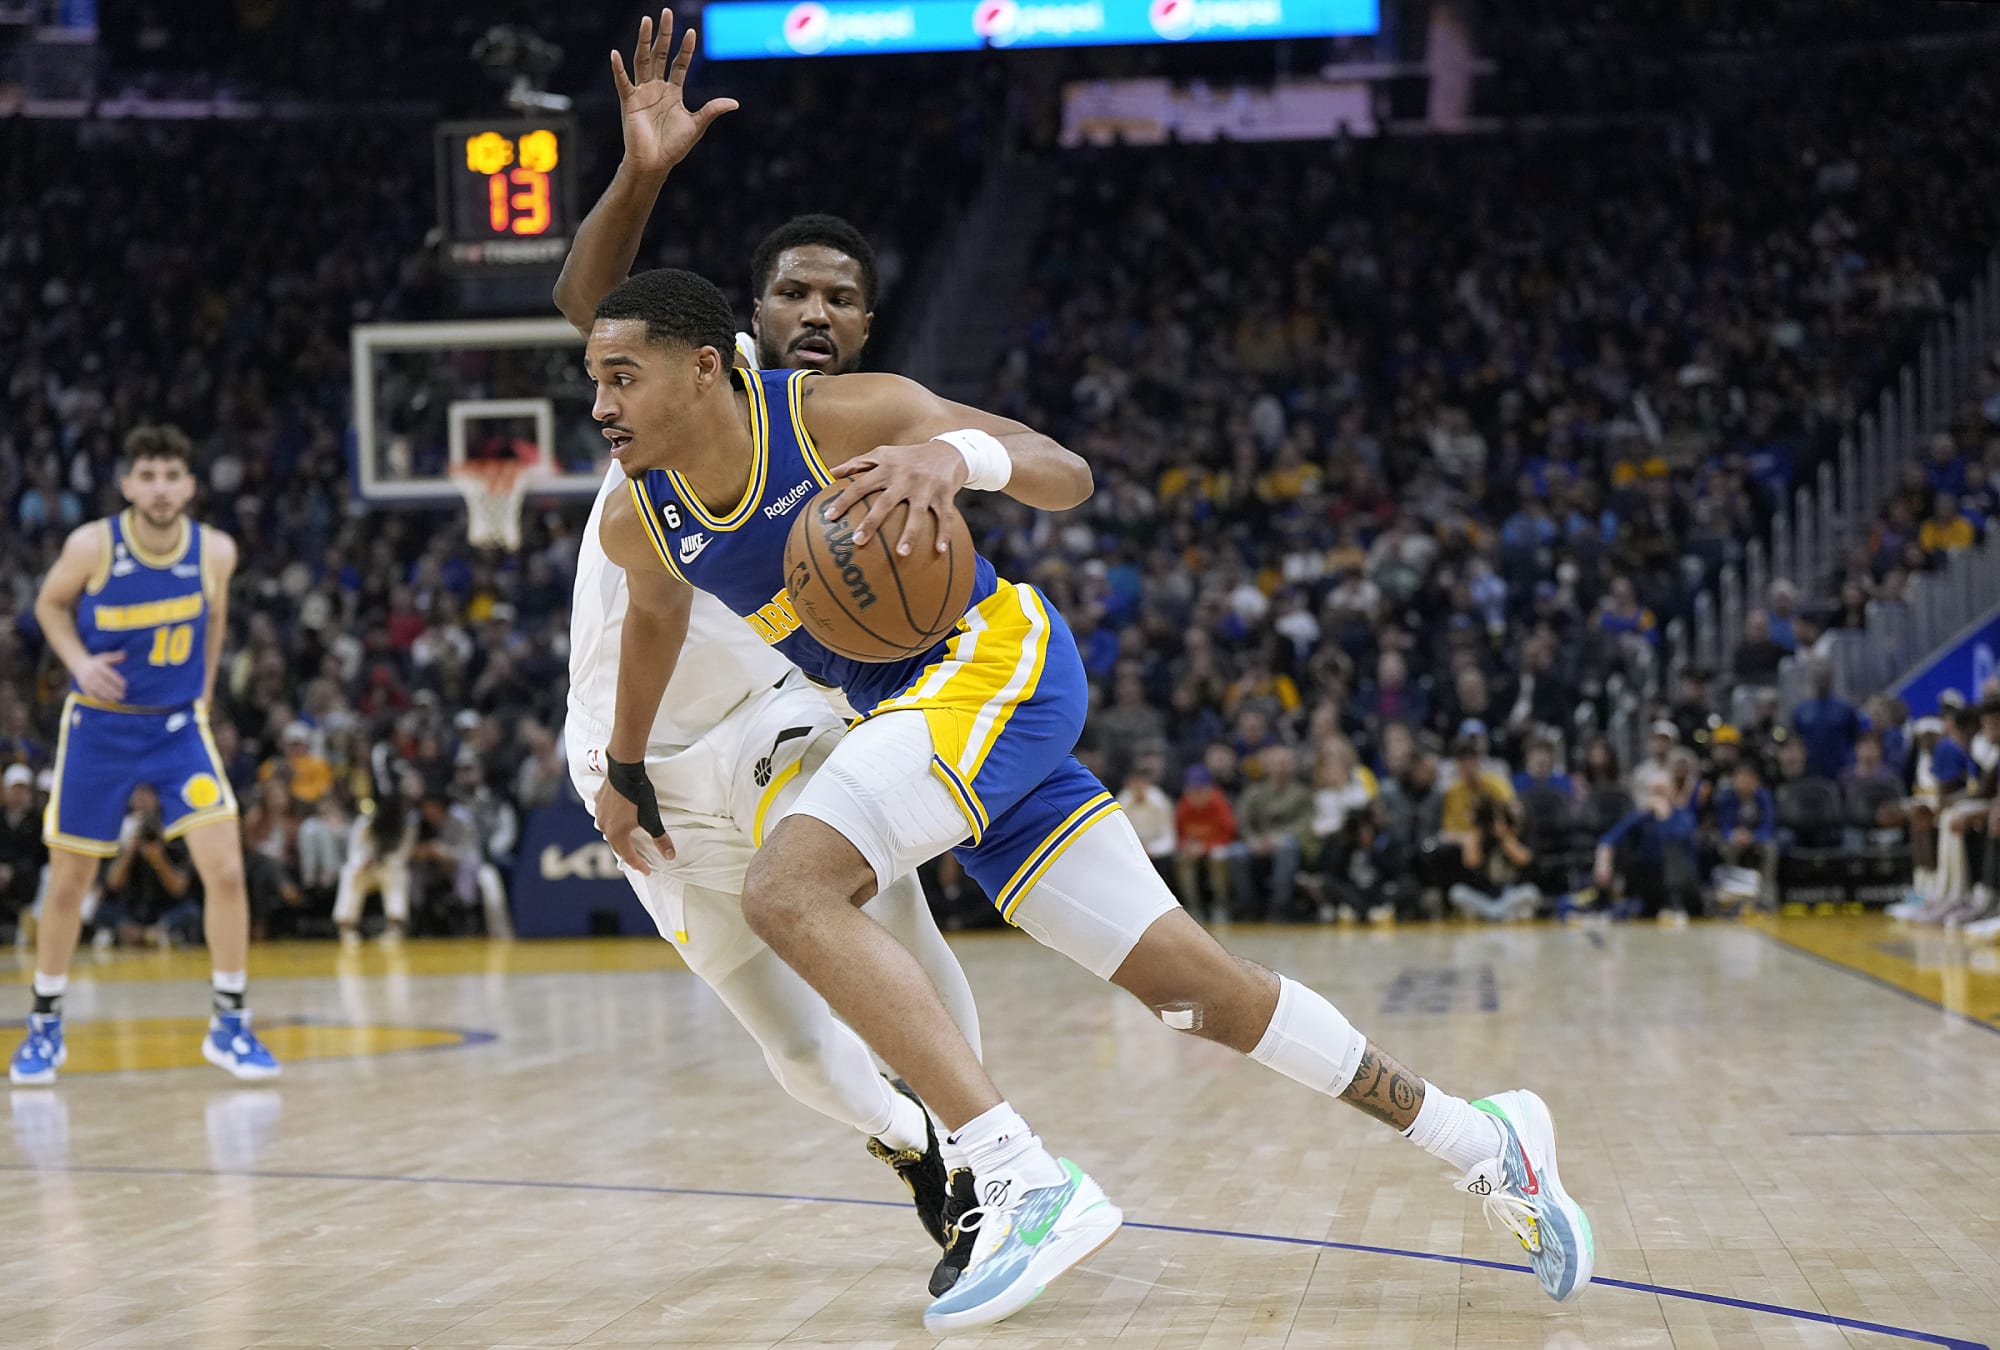 The sneakers of Jordan Poole of the Golden State Warriors before the  News Photo - Getty Images